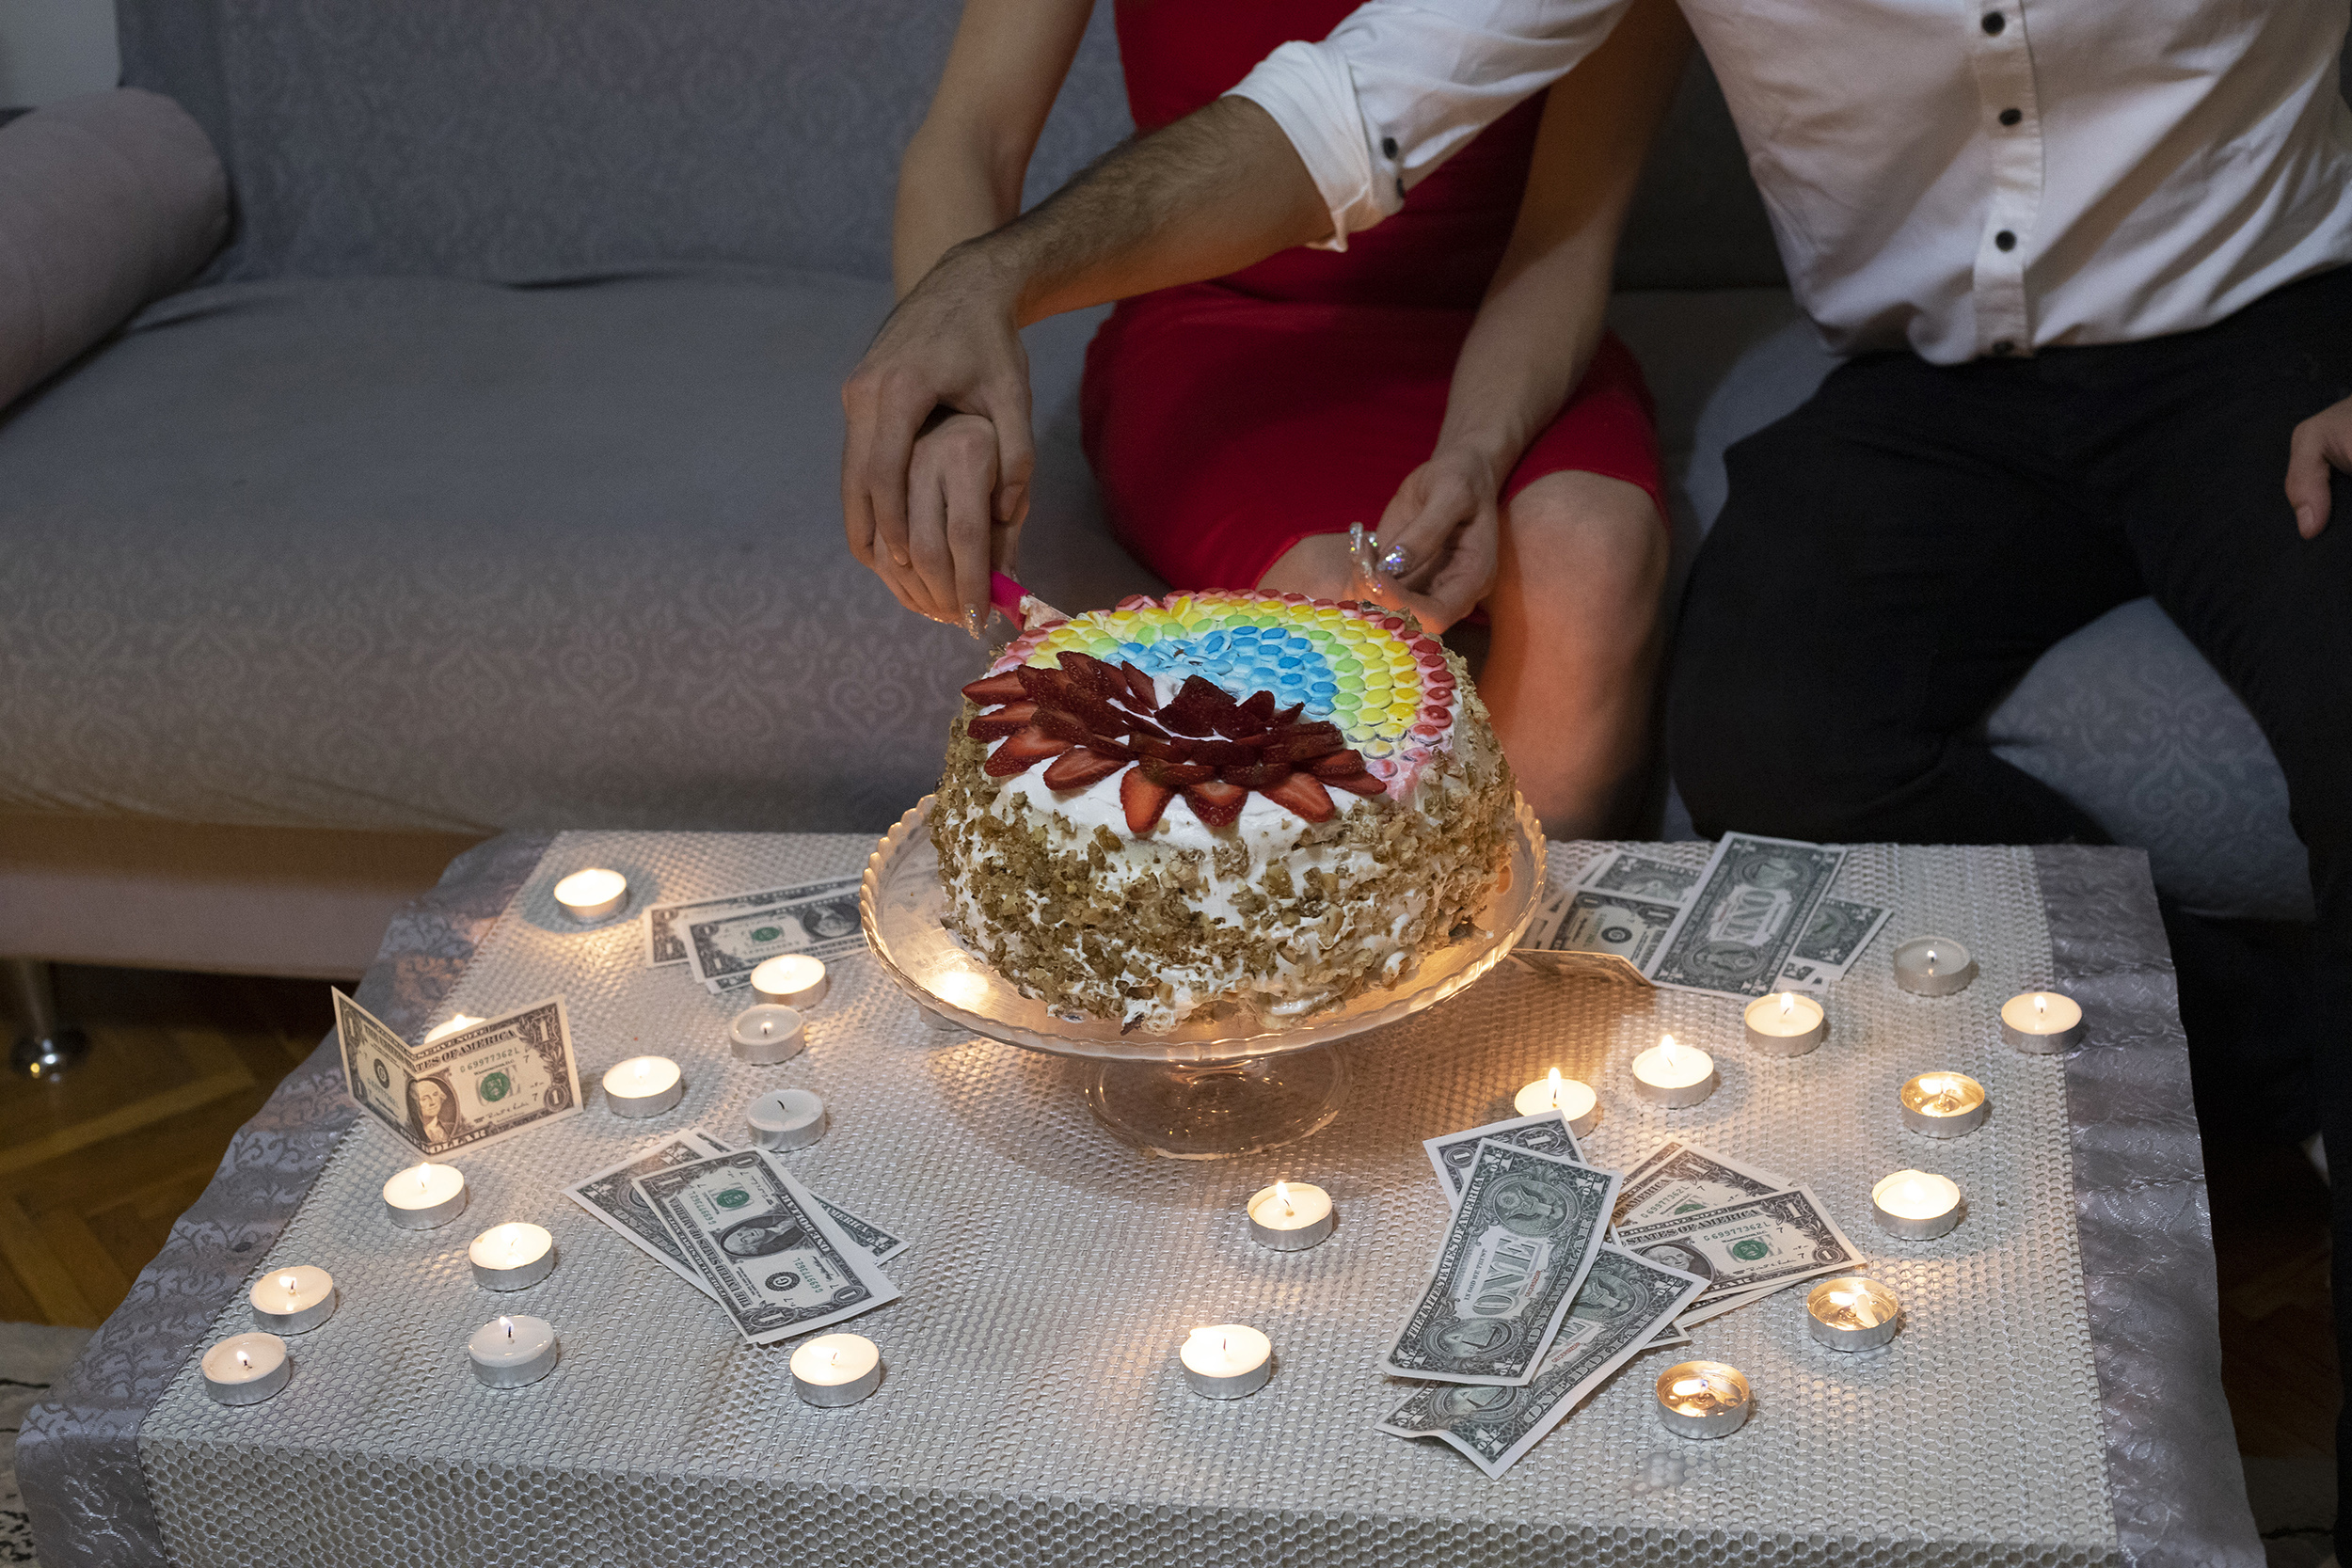 Untitled (from the series You Only Leave Once), 2021, Digital Photography. Maki cuts her birthday cake, which is made by Baran, with her boyfriend who supports her emotionally and financially.